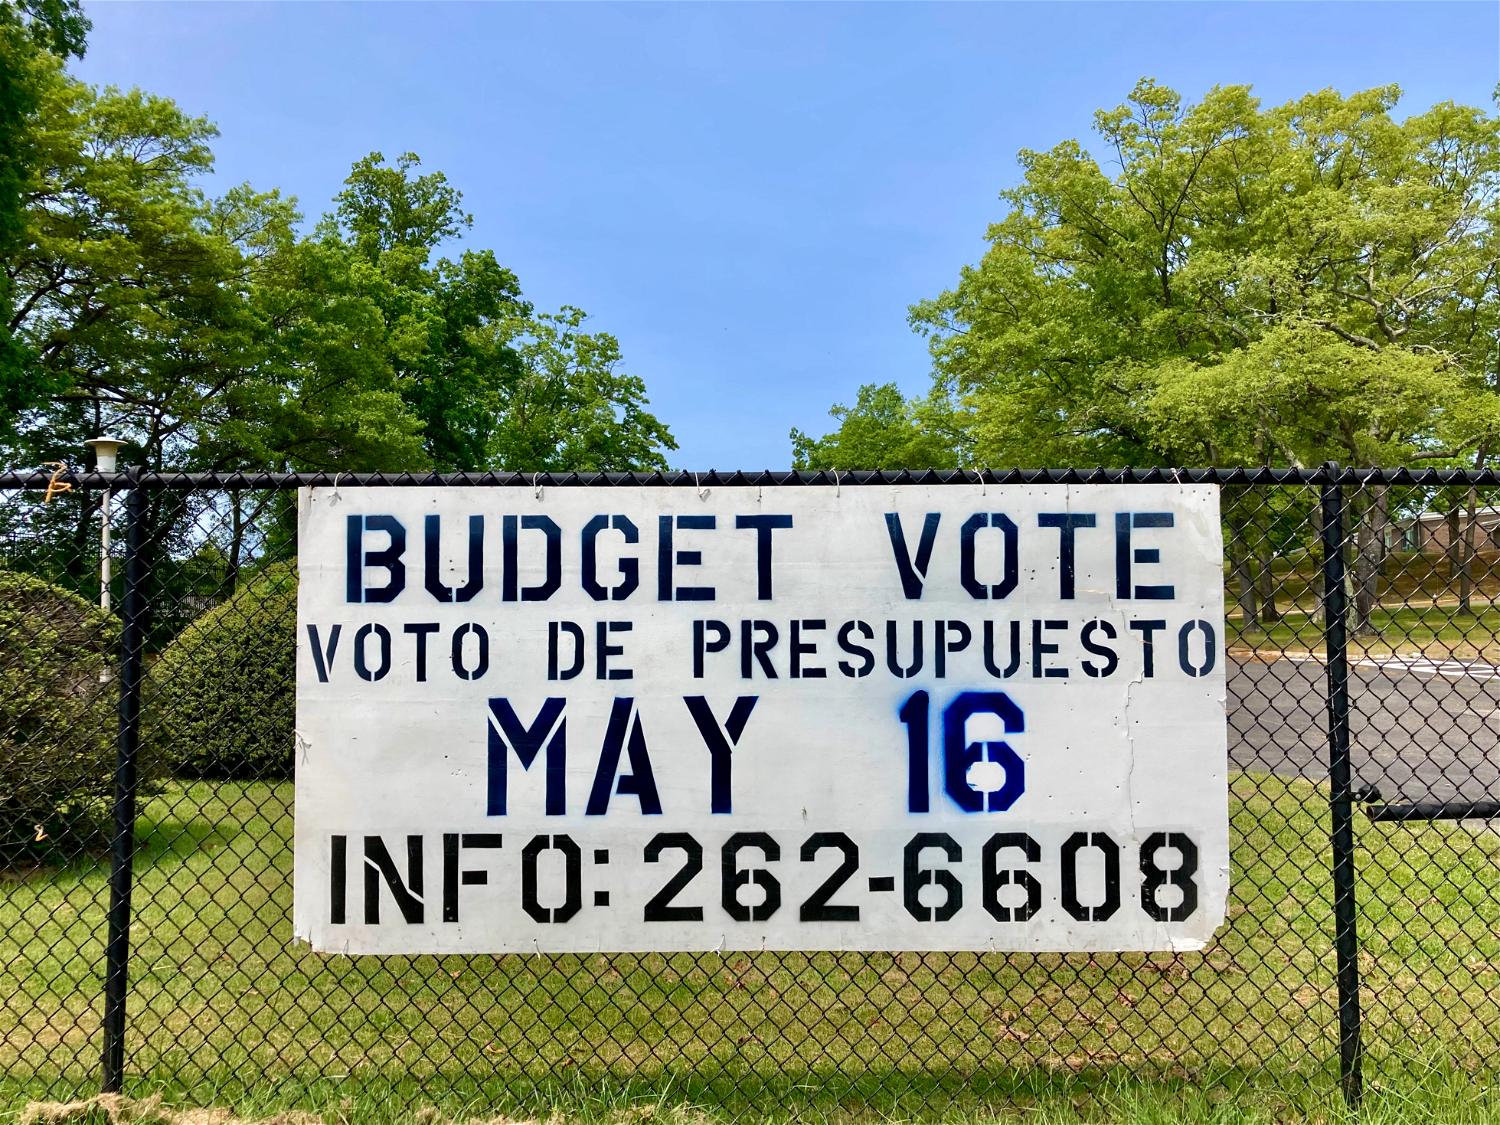 The annual budget vote and election of trustees is Tuesday, May 16, from 6am to 9pm.